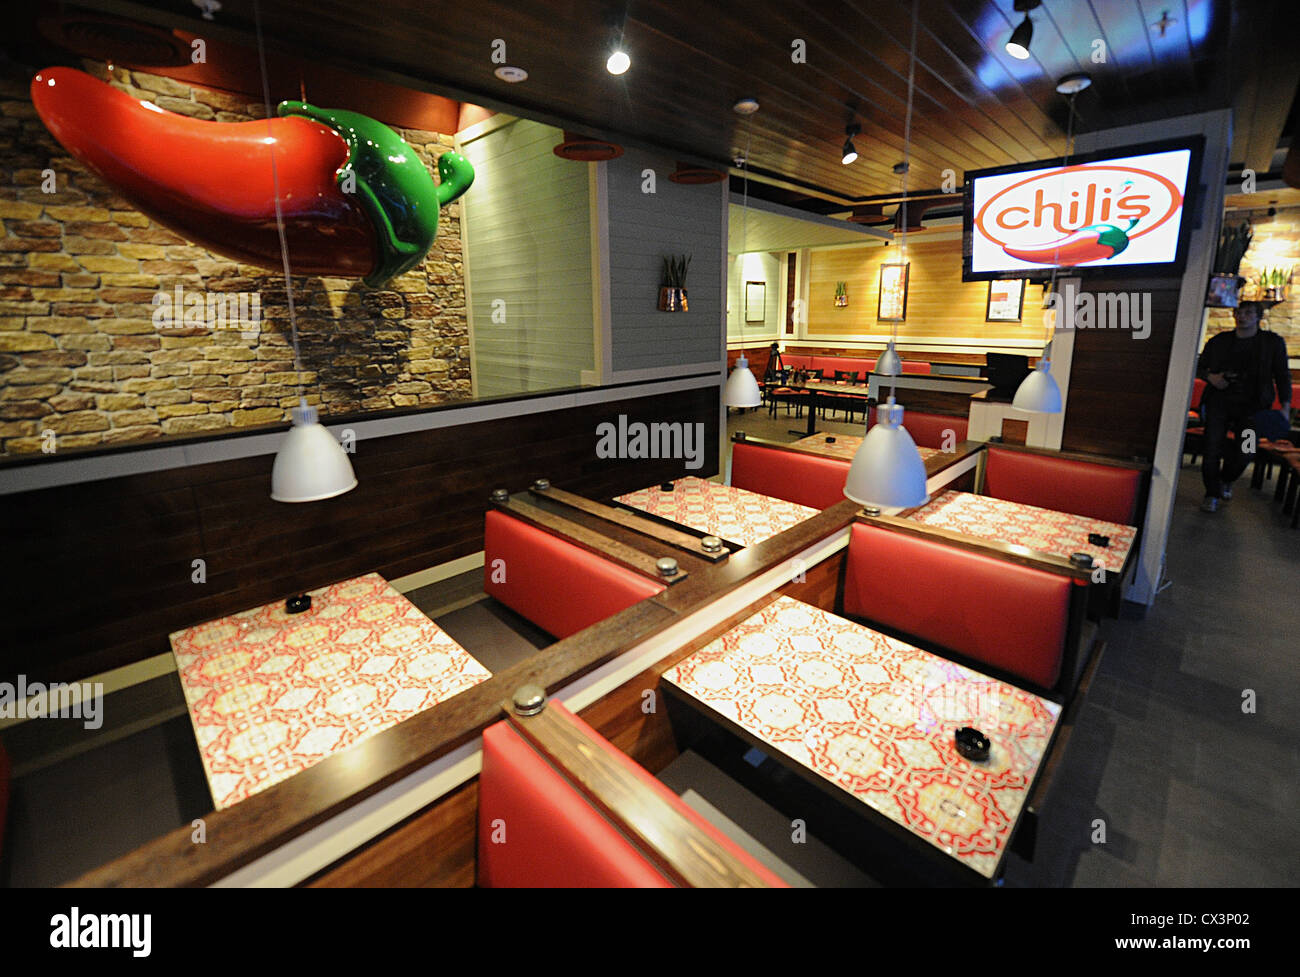 ITAR-TASS: MOSCOW, RUSSIA. FEBRUARY 1, 2011. Inside a 'Chili's ...